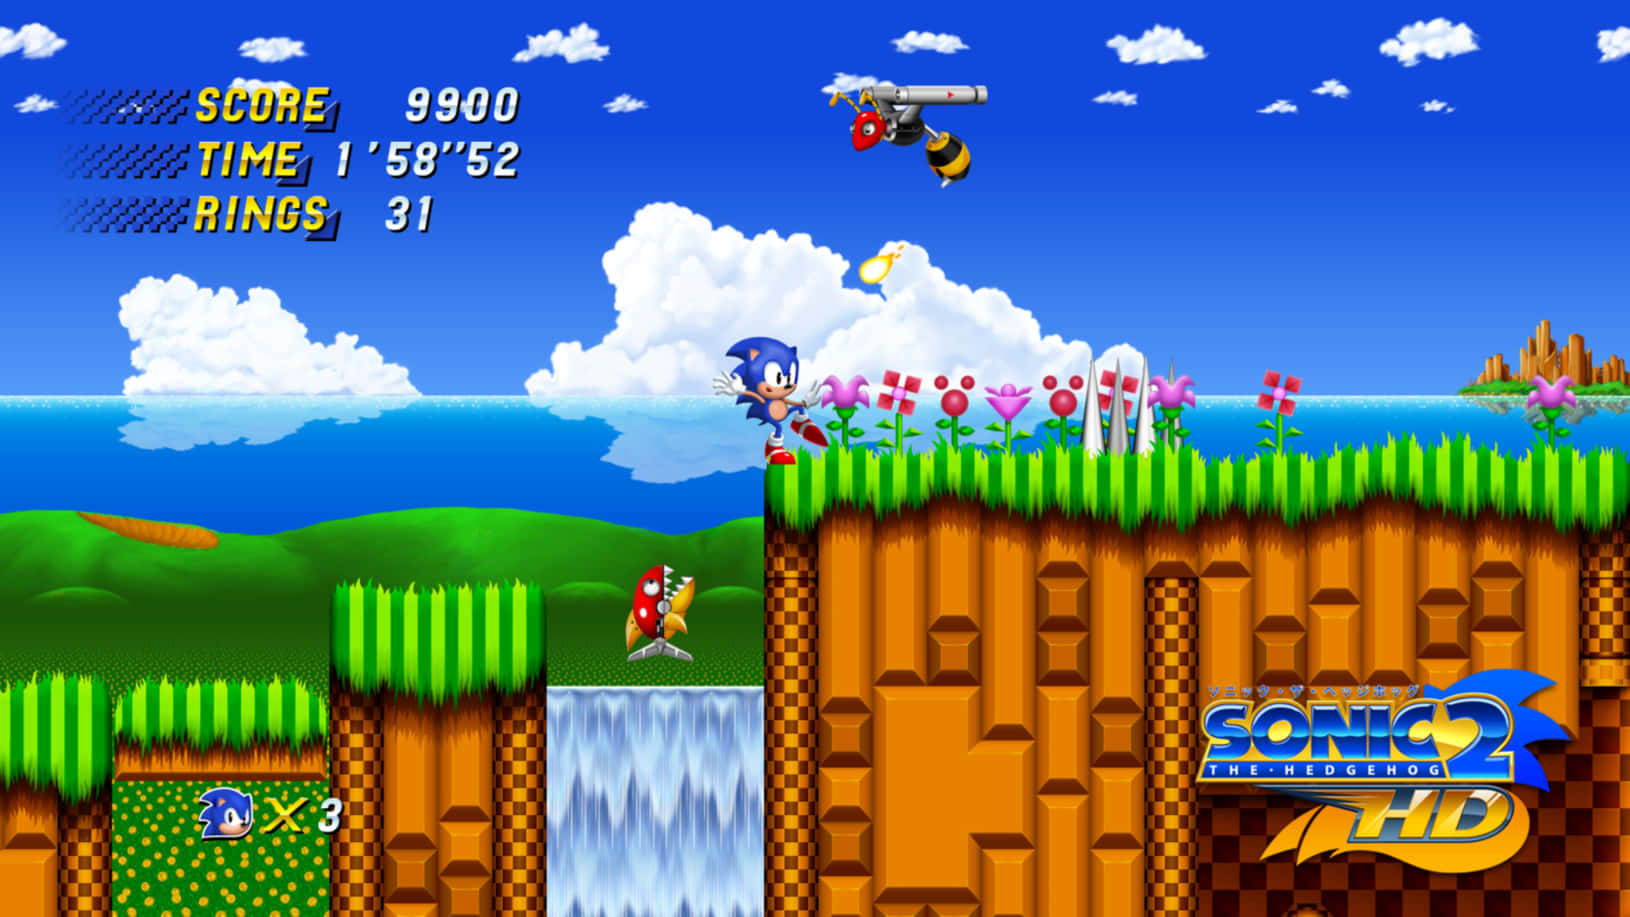 100+] Sonic 2 Hd Wallpapers